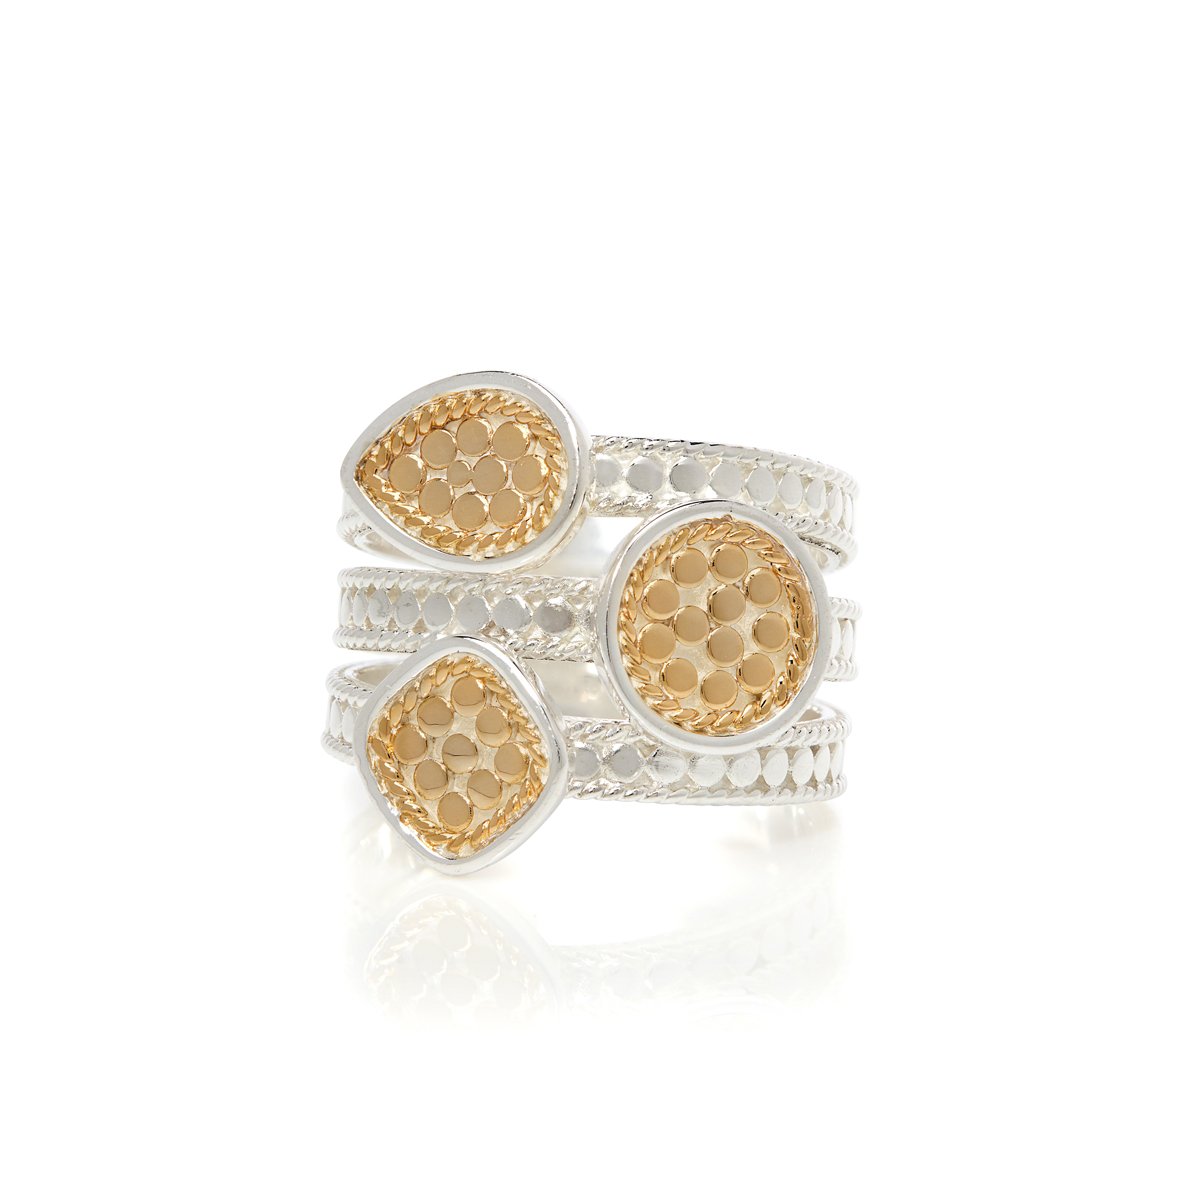 CLASSIC FAUX STACKING RING - MULTI